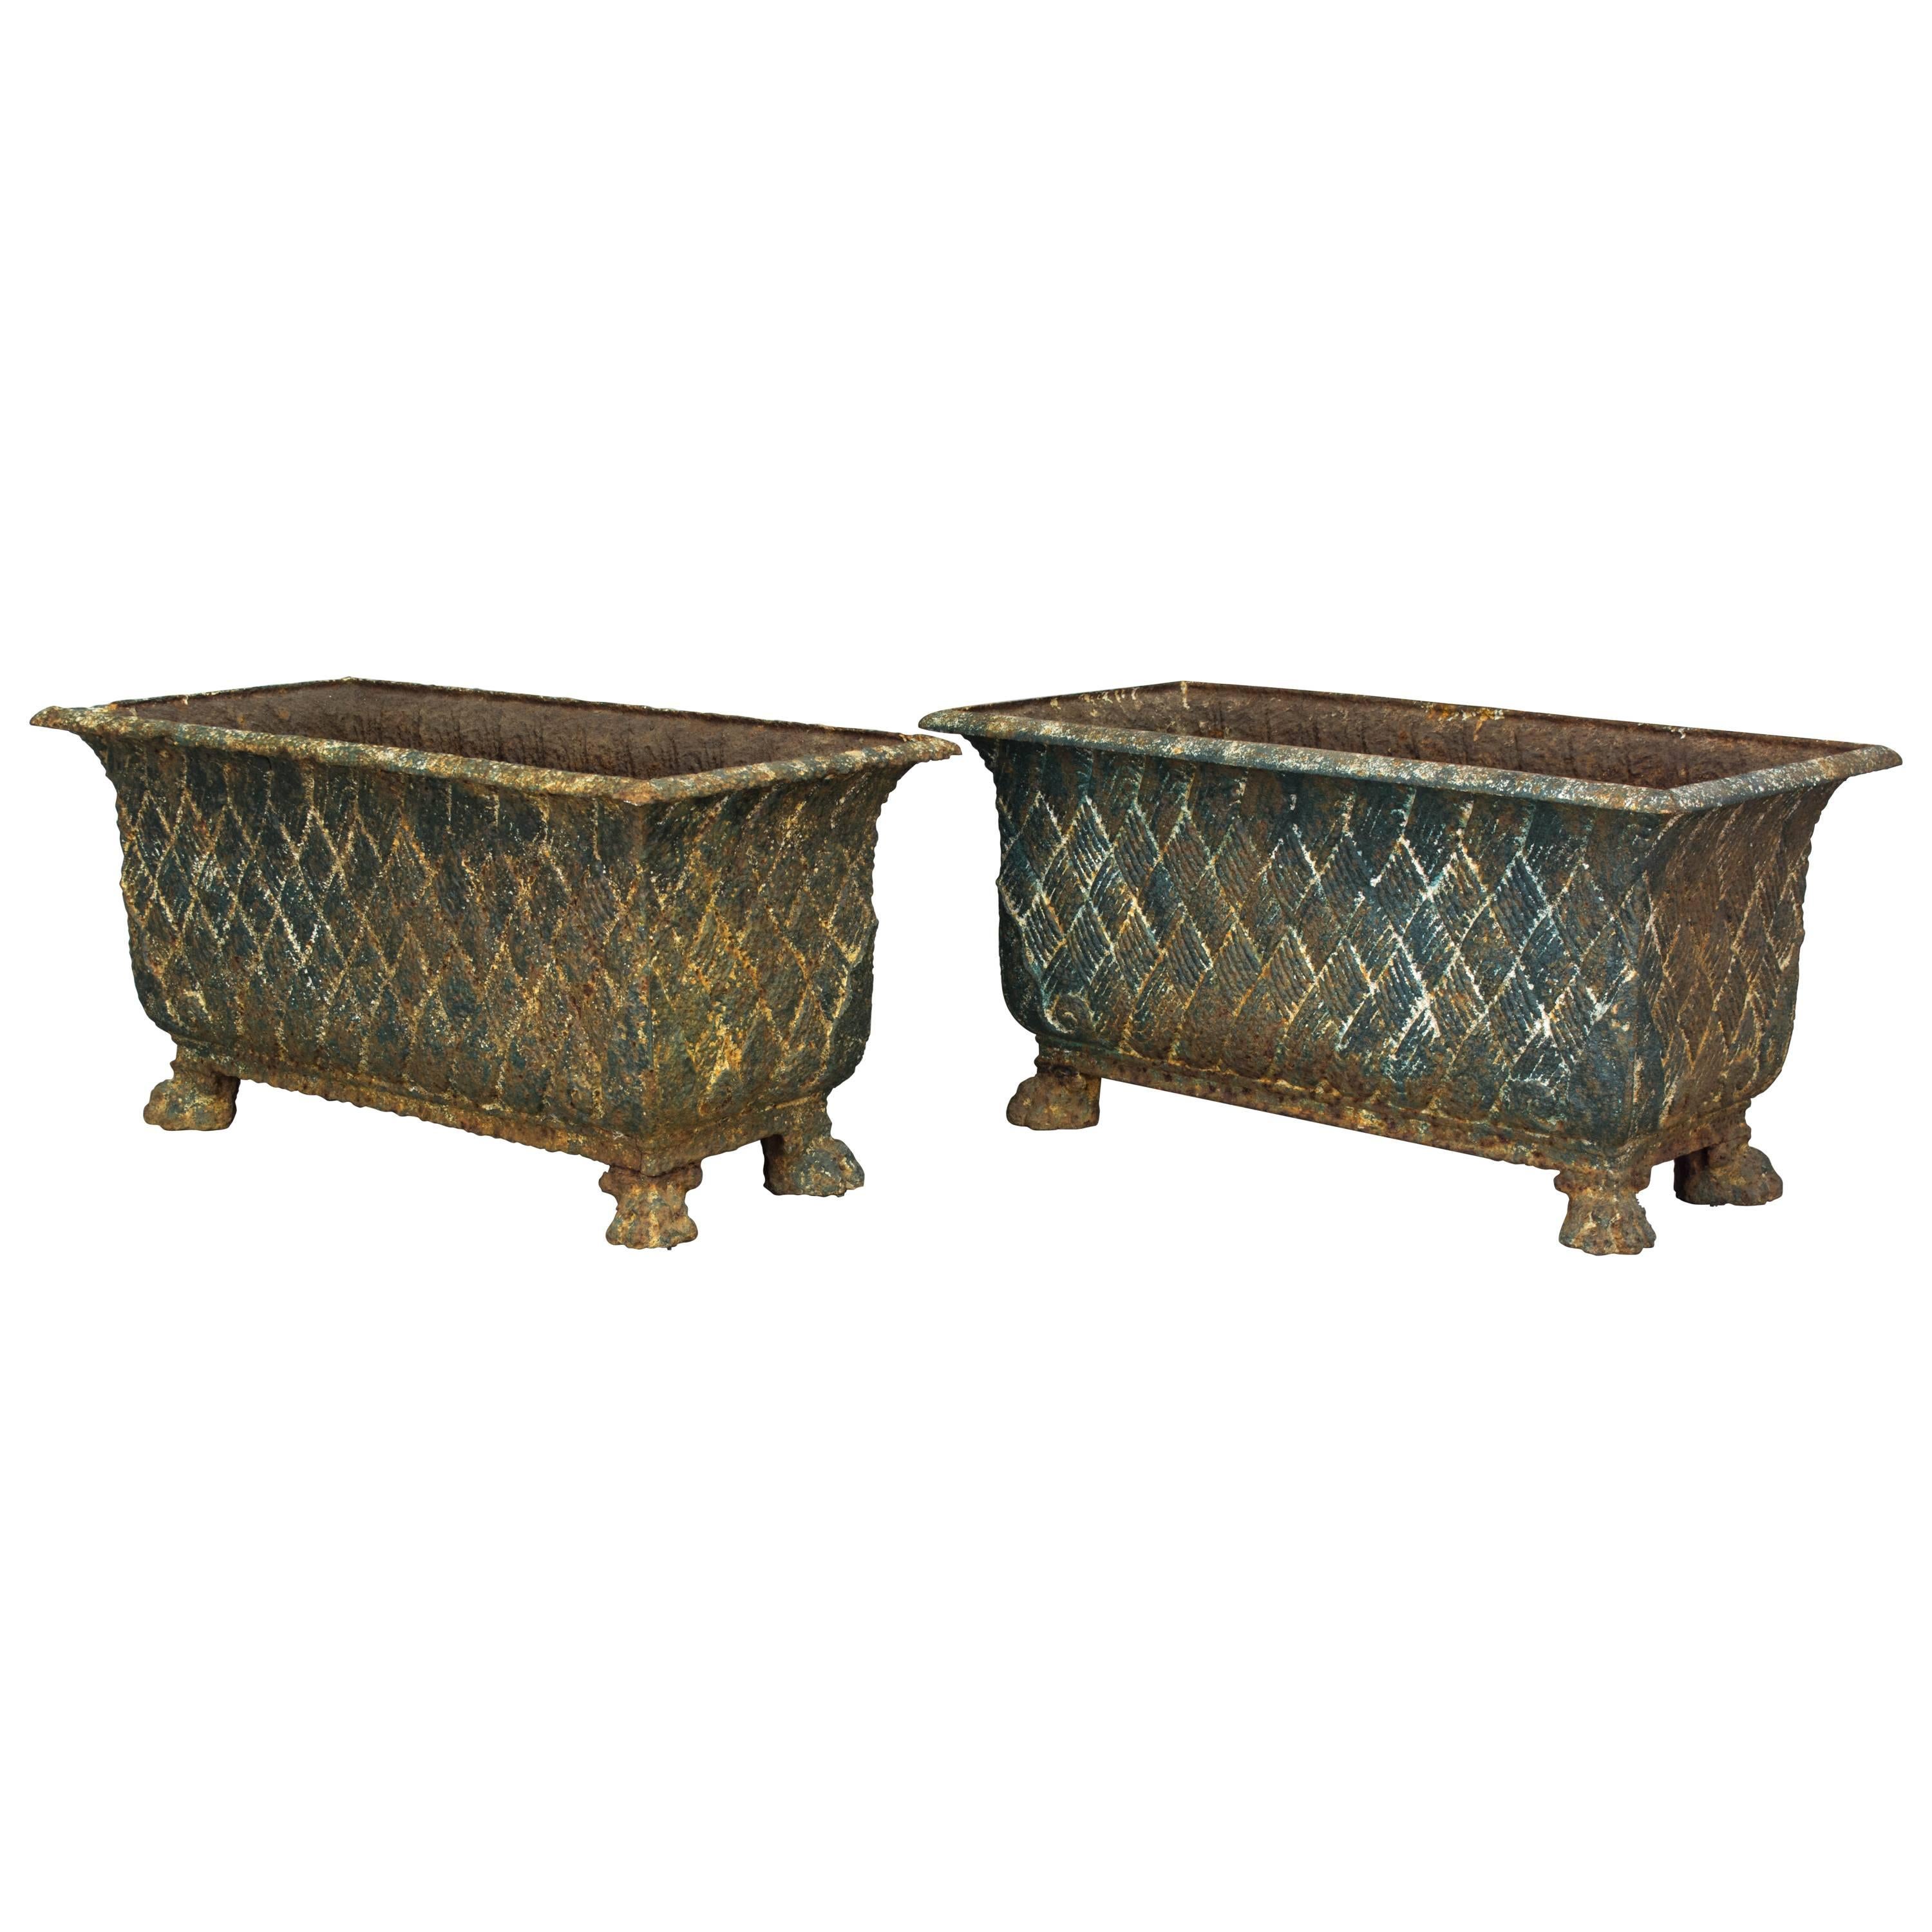 Pair of 19th Century French Cast Iron Planters